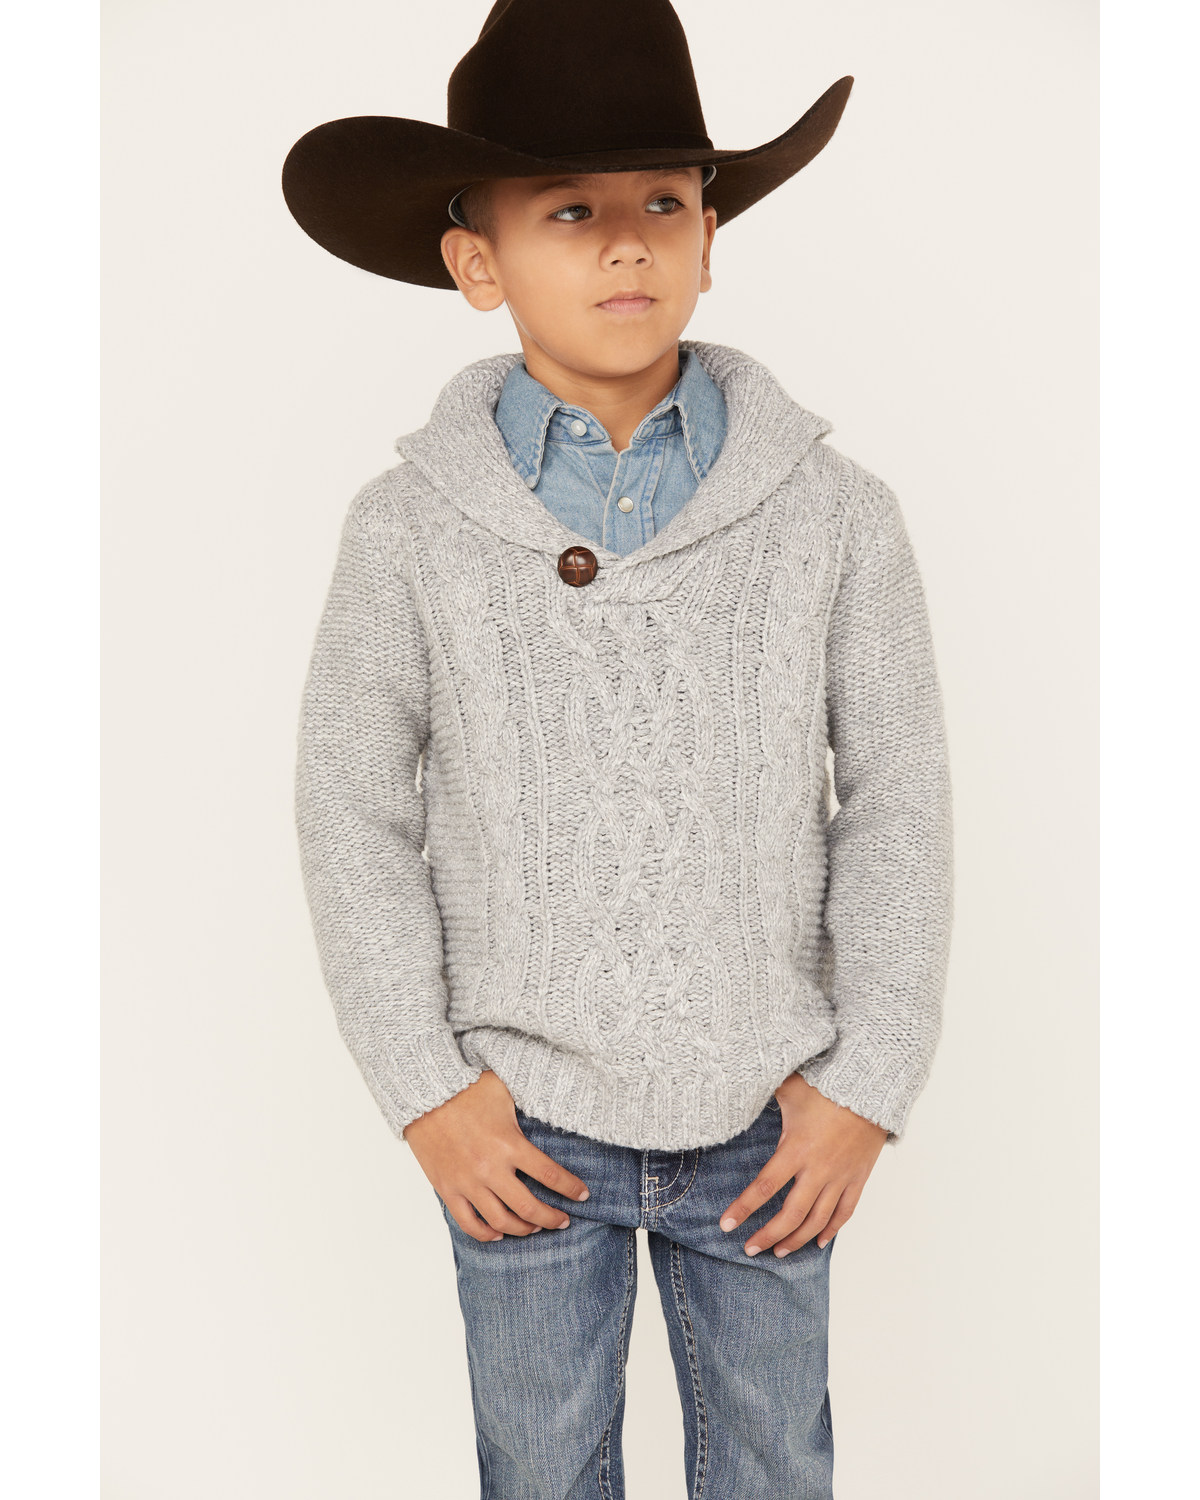 Cotton & Rye Boys' Cable Knit Sweater